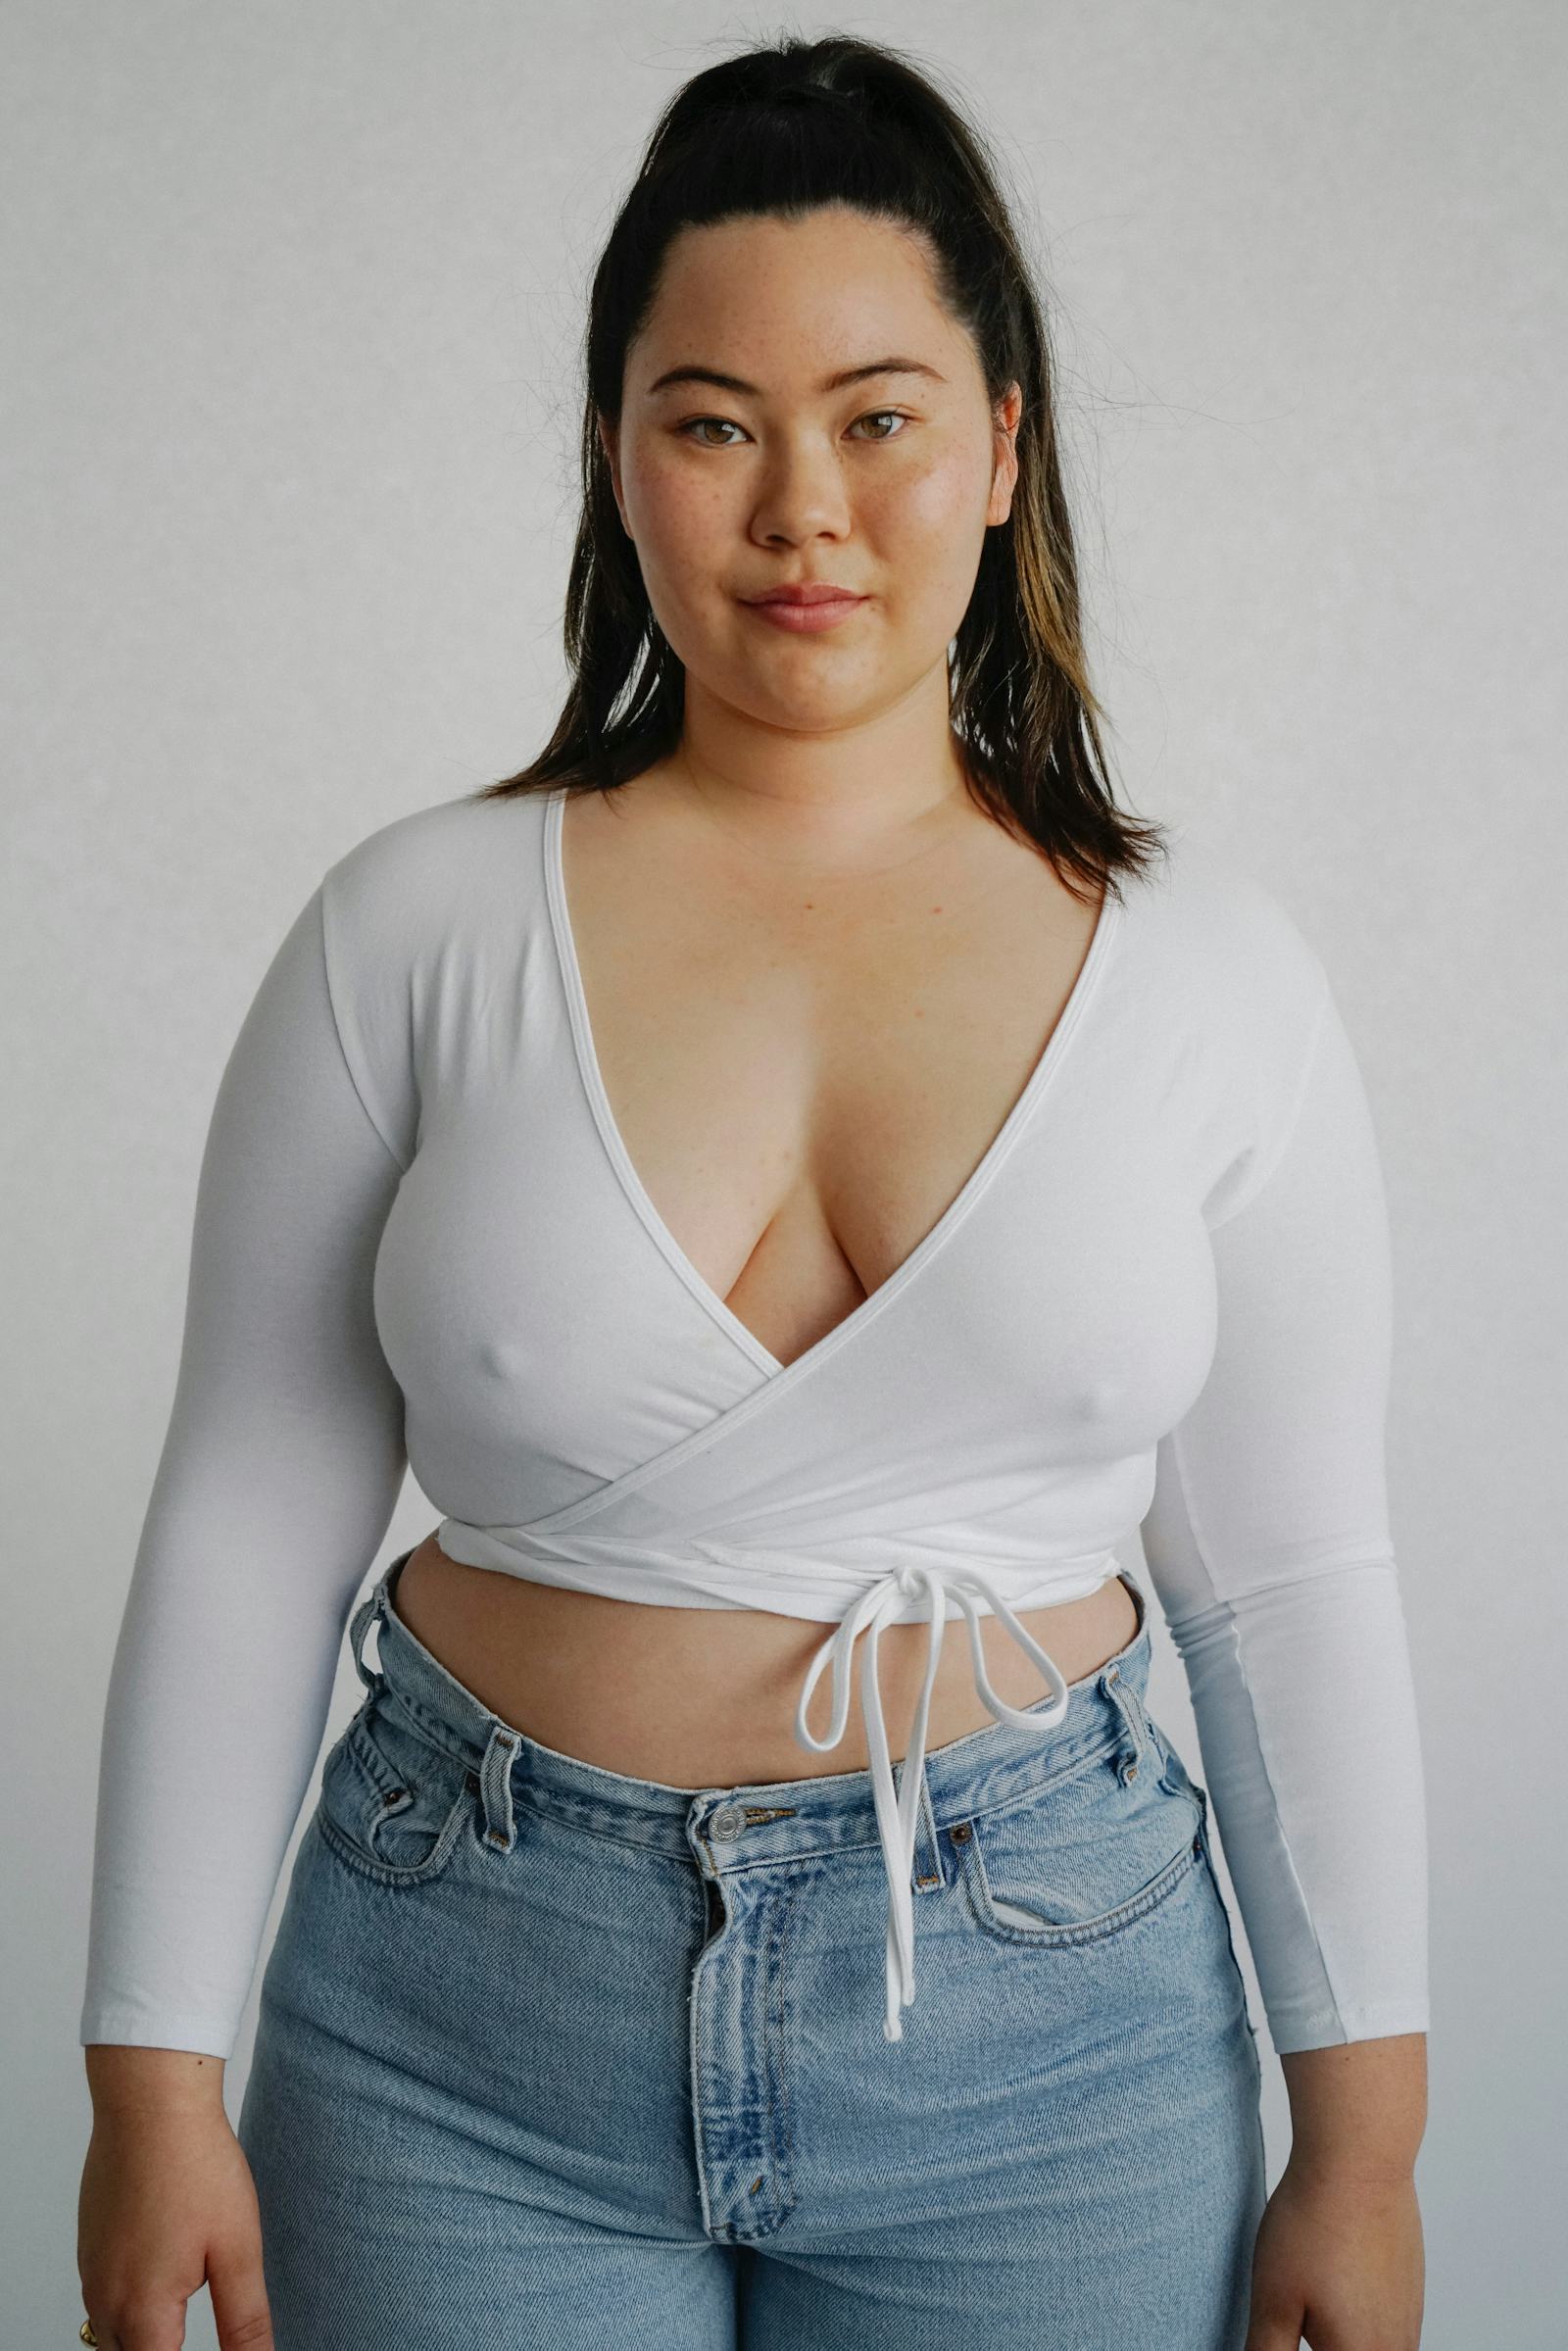 Plus Size Model Minami Gessel Wants To Inspire Other Asian G